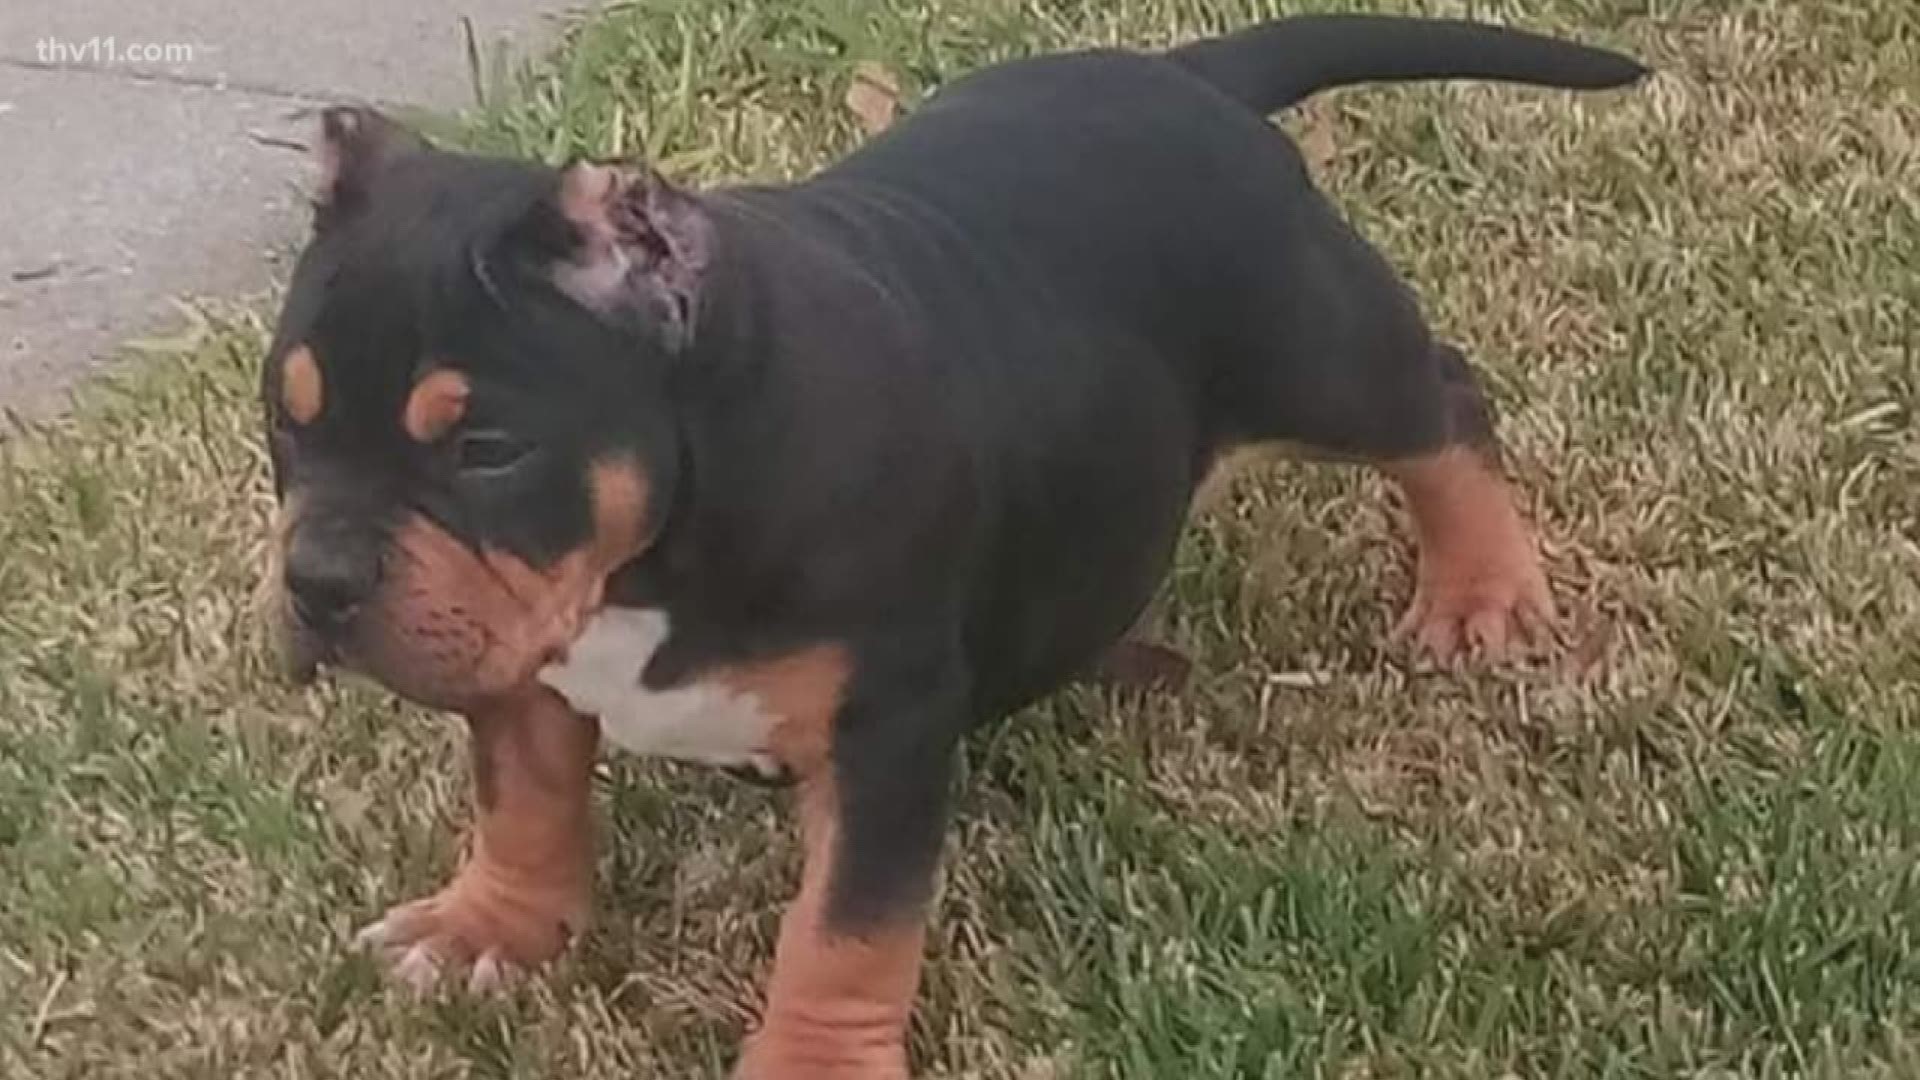 A Central Arkansas family is incomplete tonight. 
The smallest member, a puppy, was stolen outside a Little Rock home.
THV11's Michael Aaron brings us their desperate plea.. and their incentive for his safe return.